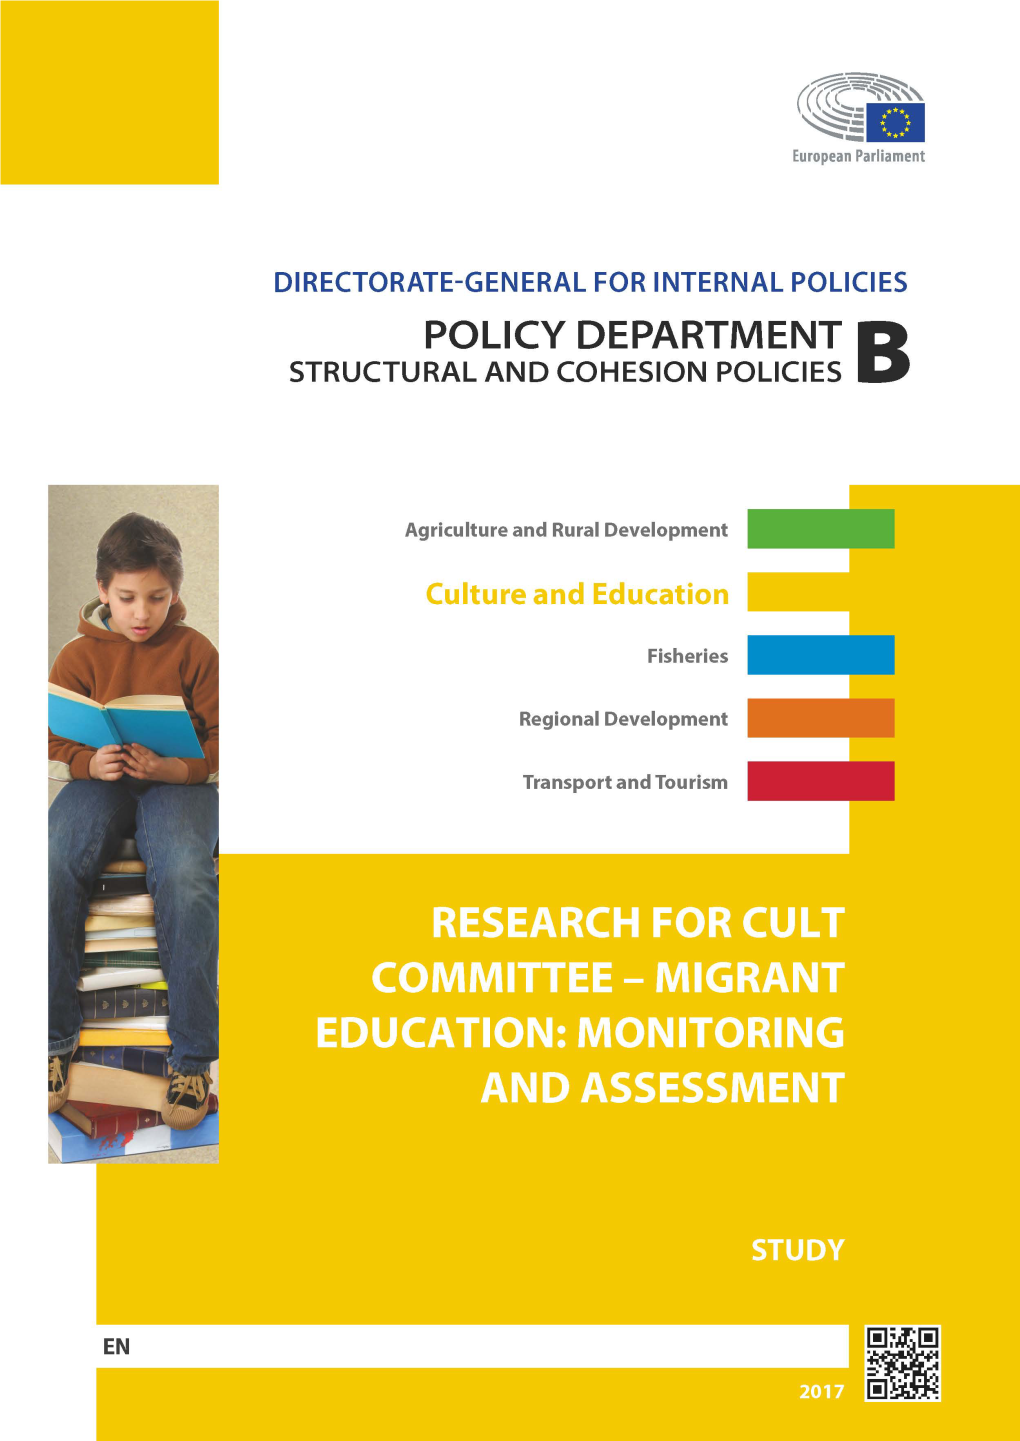 Migrant Education: Monitoring and Assessment